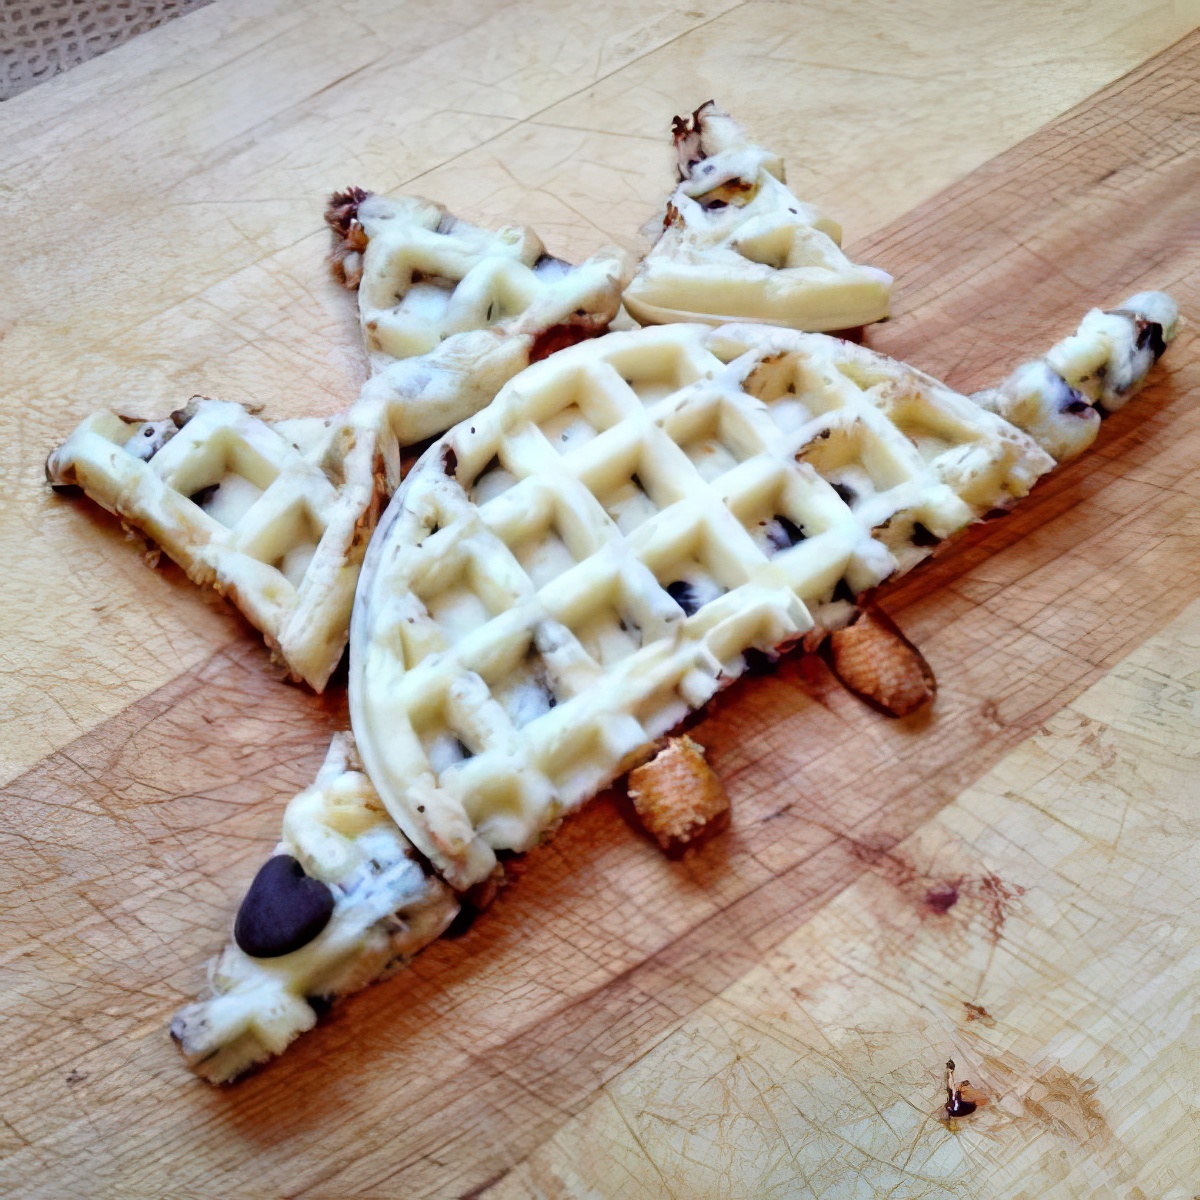 Munch with these yummy dinosaur waffles with your kids!